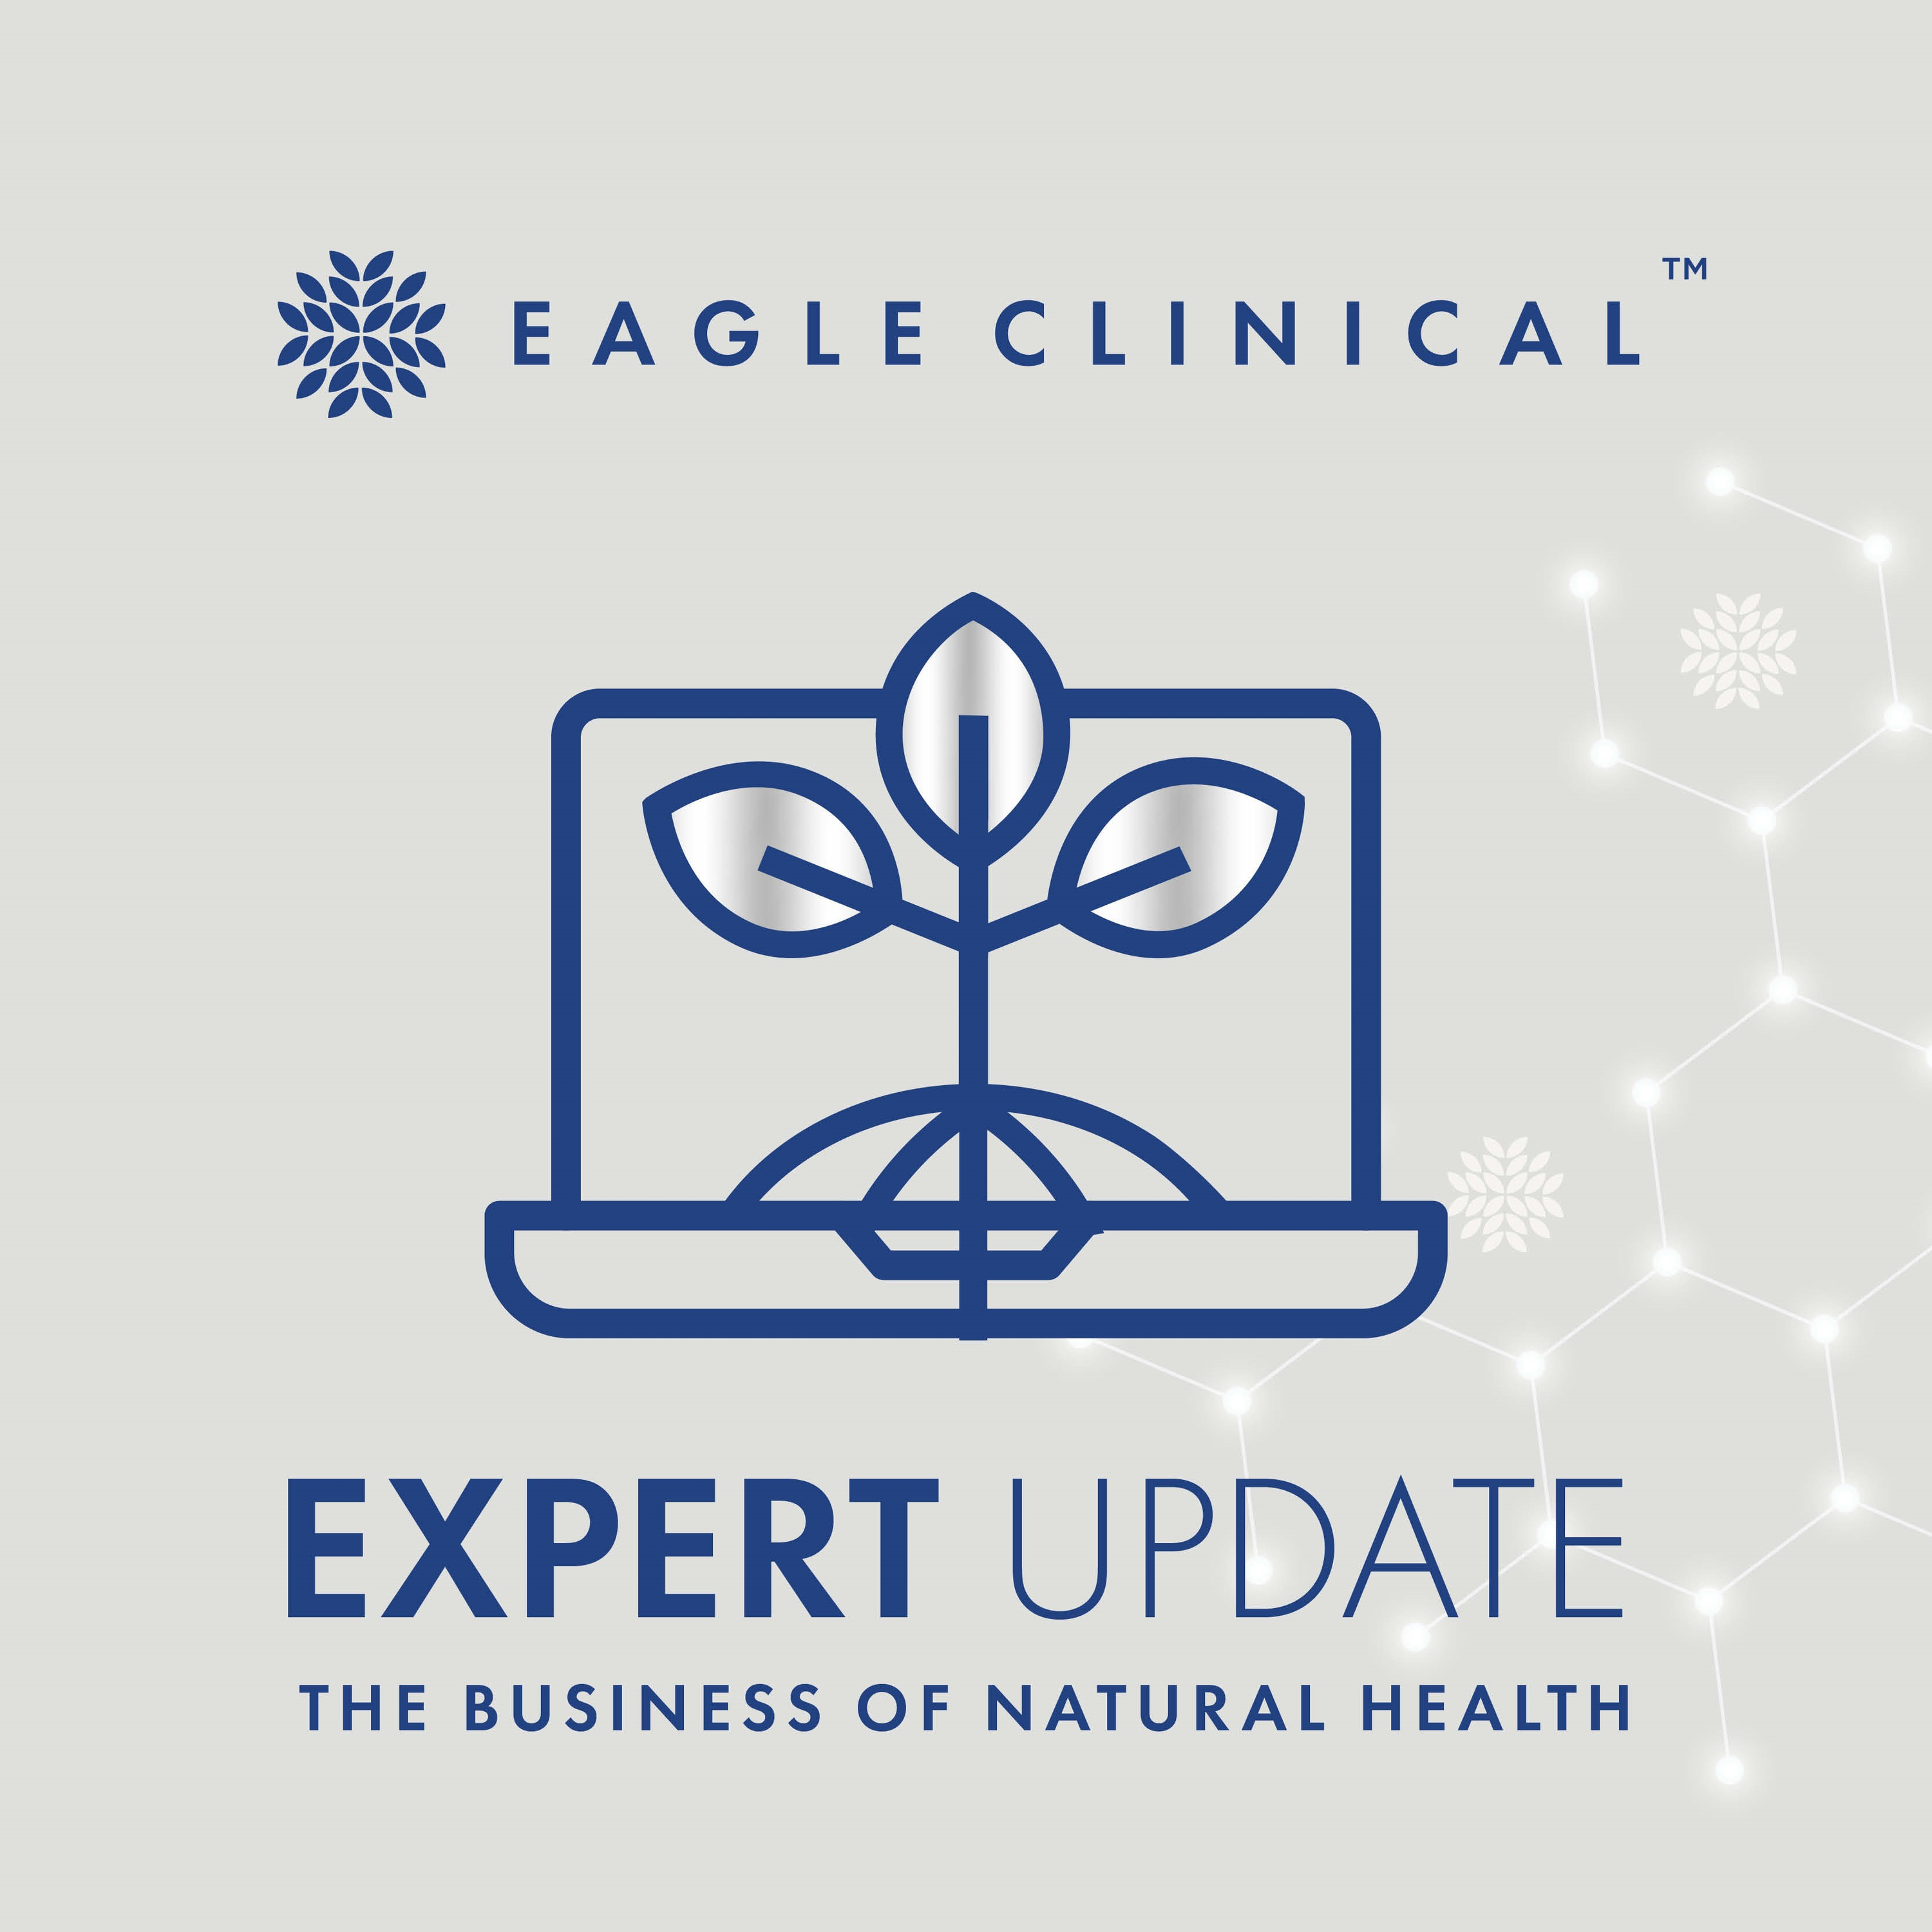 Eagle Clinical Expert Update: The Business of Natural Health